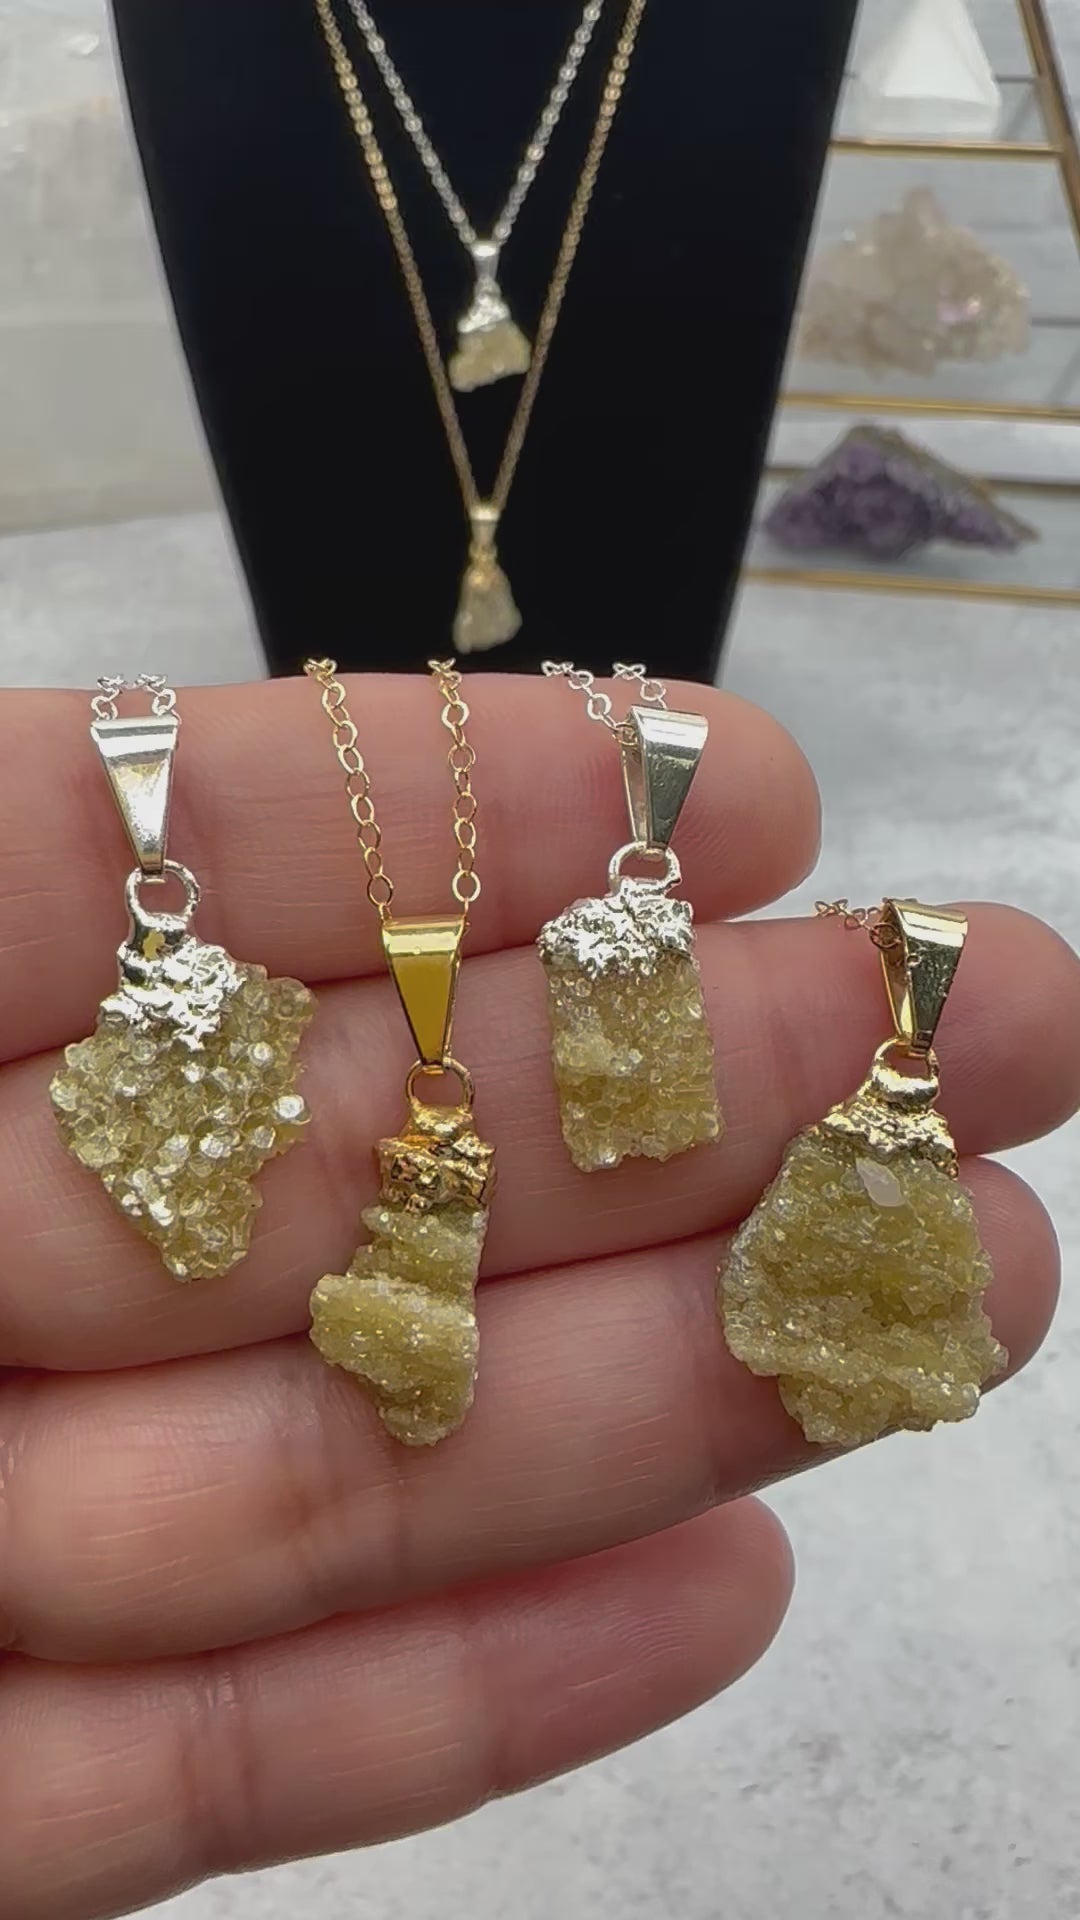 Golden Star Muscovite Necklace - Silver or Gold - Crystal Necklace Limited Stock